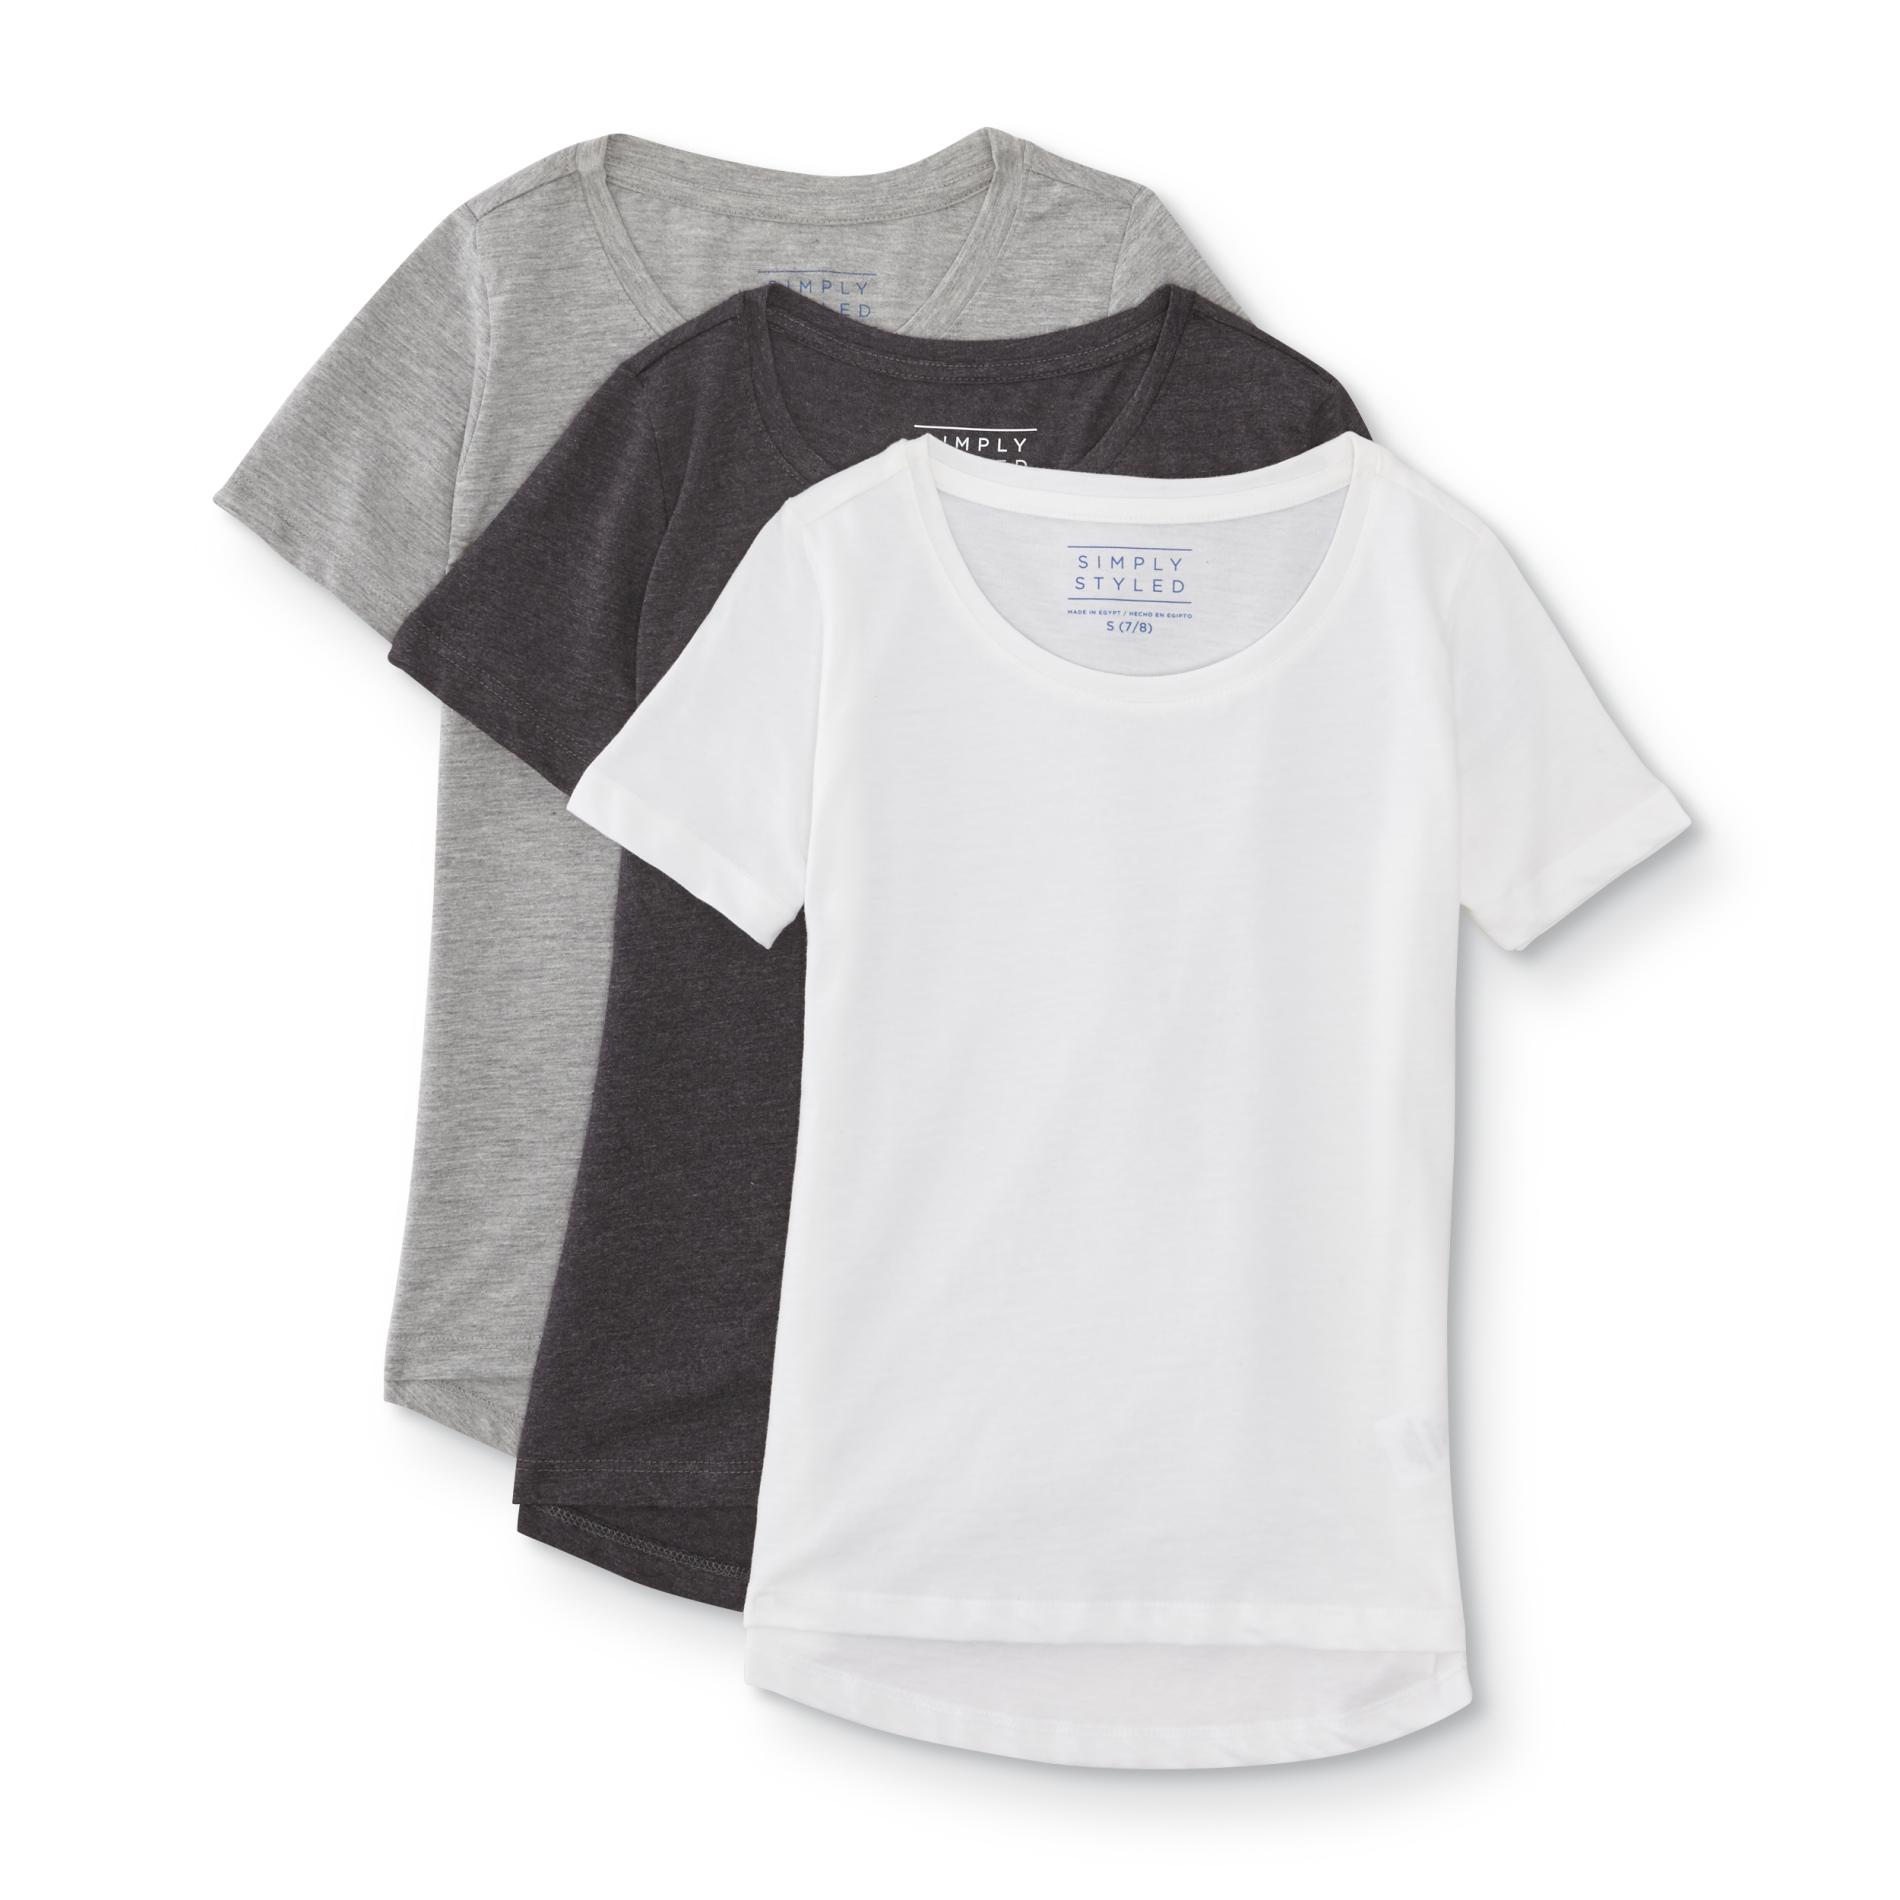 Simply Styled Girls' 3-Pack Scoop Neck T-Shirts